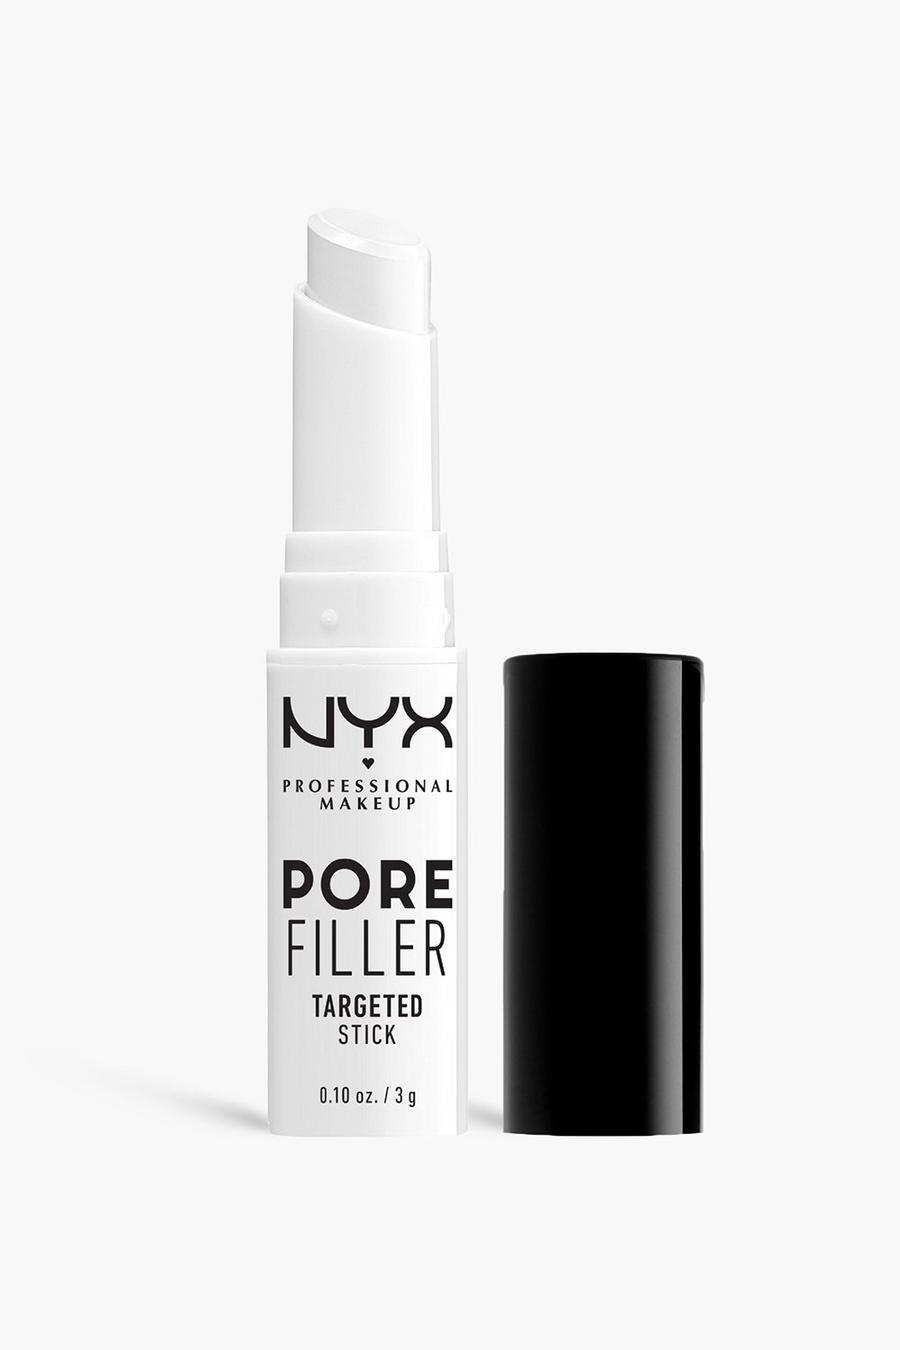 Clear NYX Professional Makeup Blurring Vitamin E Infused Pore Filler Face Primer Stick